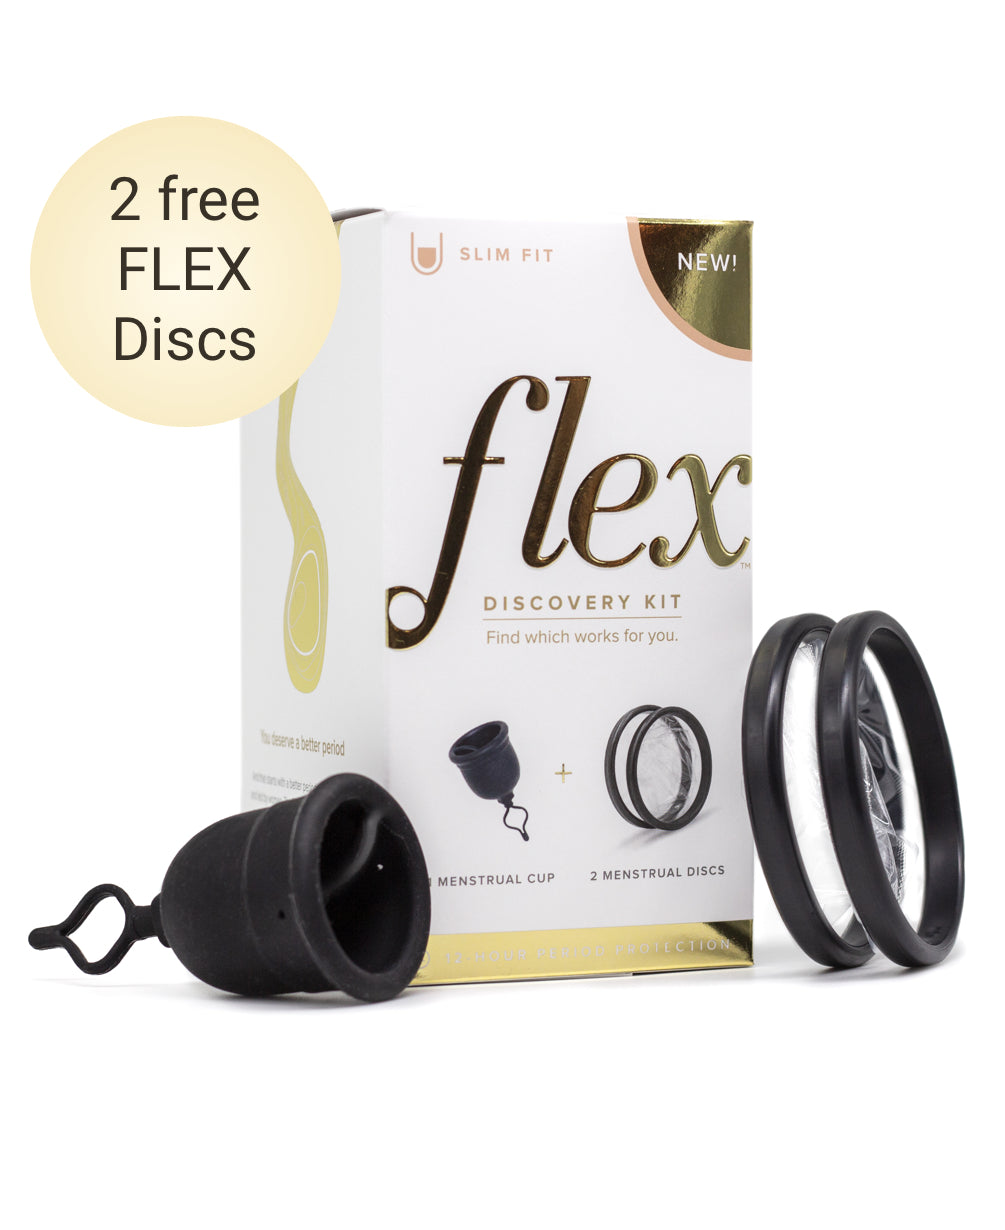 One FLEX Cup and 2 free discs for you to try. 